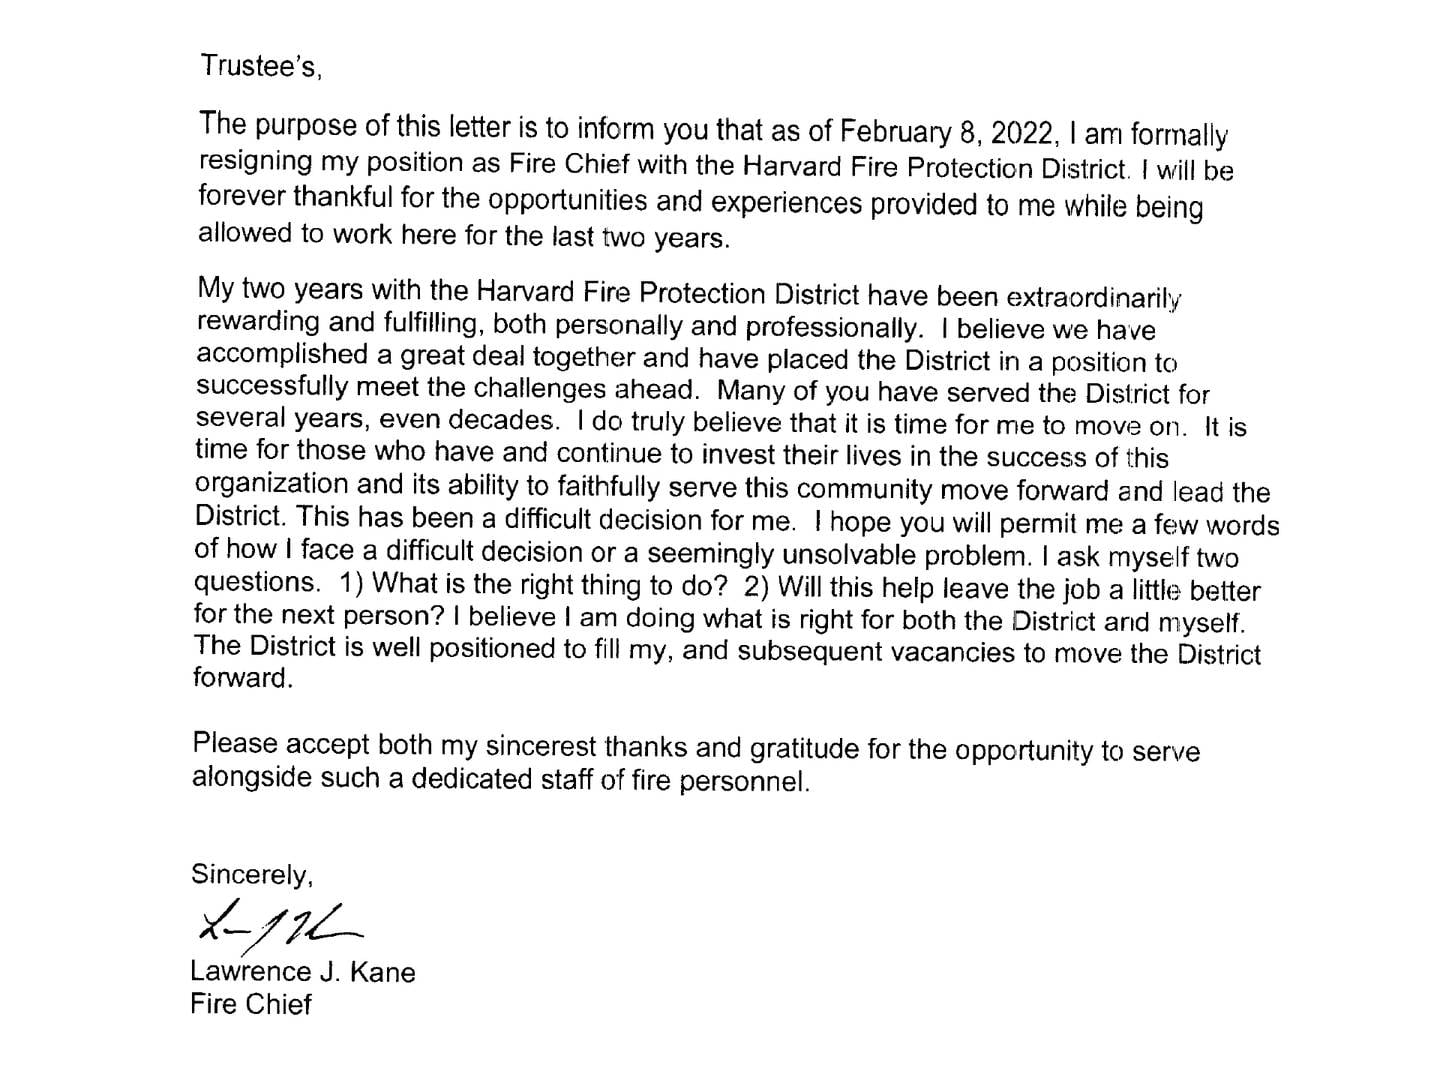 Harvard Fire Protection District Chief Lawrence Kane resigned without notice Tuesday, Feb. 8, 2022.